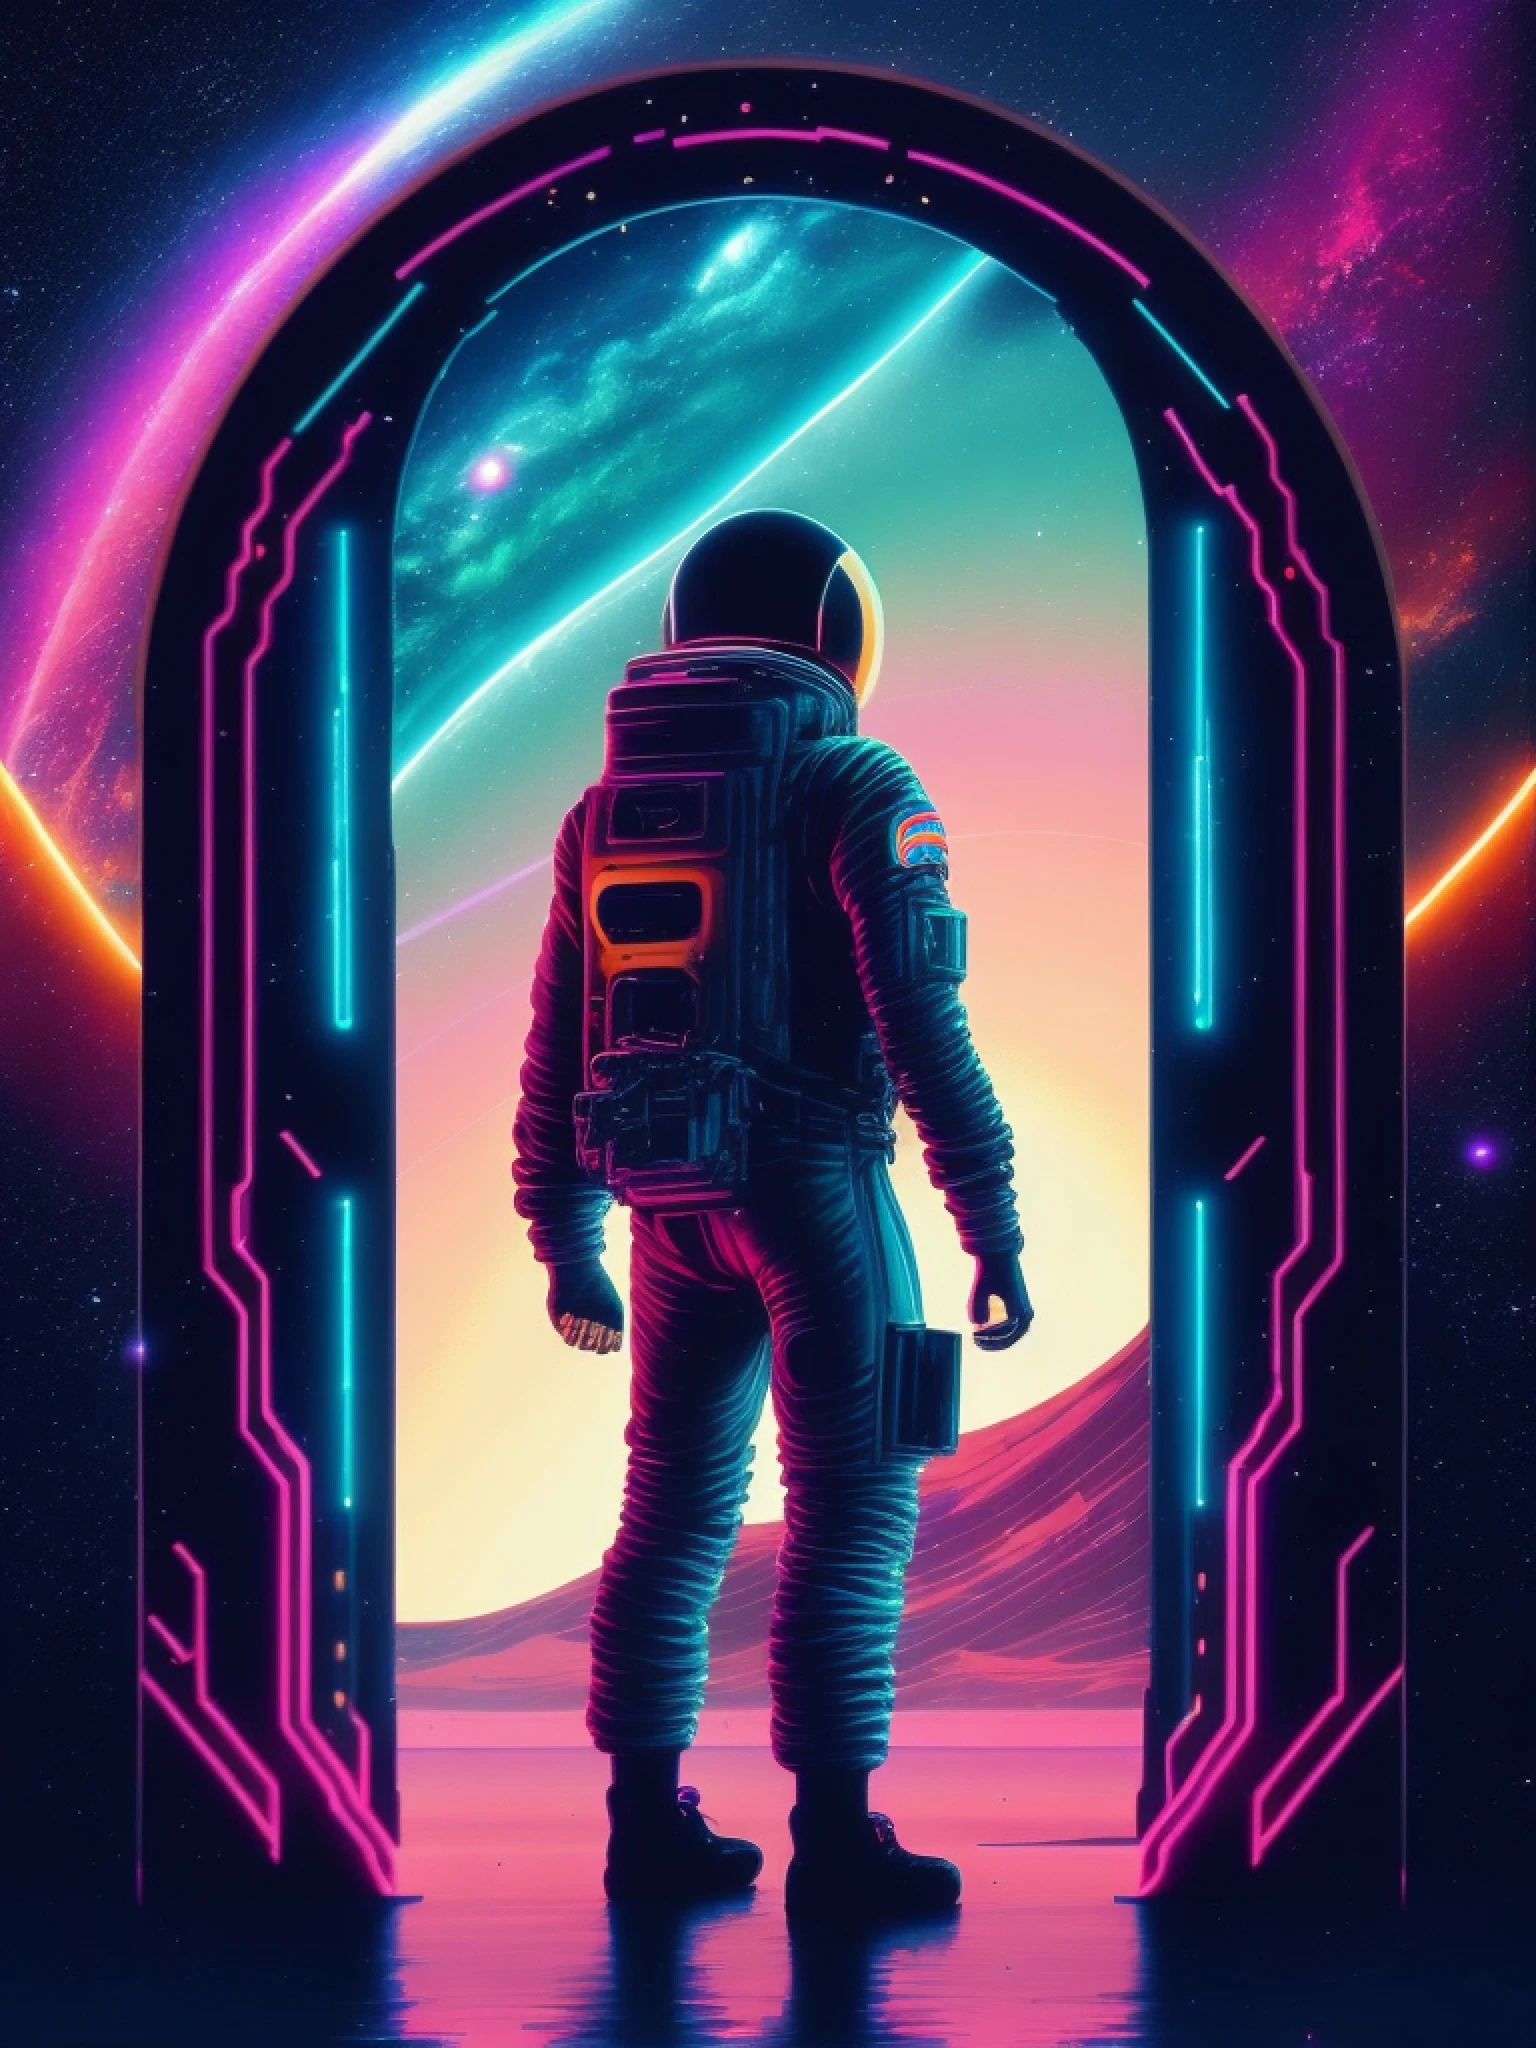 a man in a space suit standing in front of a doorway, portal to outer space, looking out into space, neon landscape, masterpiece epic retrowave art, epic retrowave art, synthwave art style, retrowave art, beautiful art uhd 4 k, outrun art style, retrowave epic art, vaporwave,retro wave, synthwave art, outrun style and colours,jen bartel,surreal space,fantasy space, outer space.